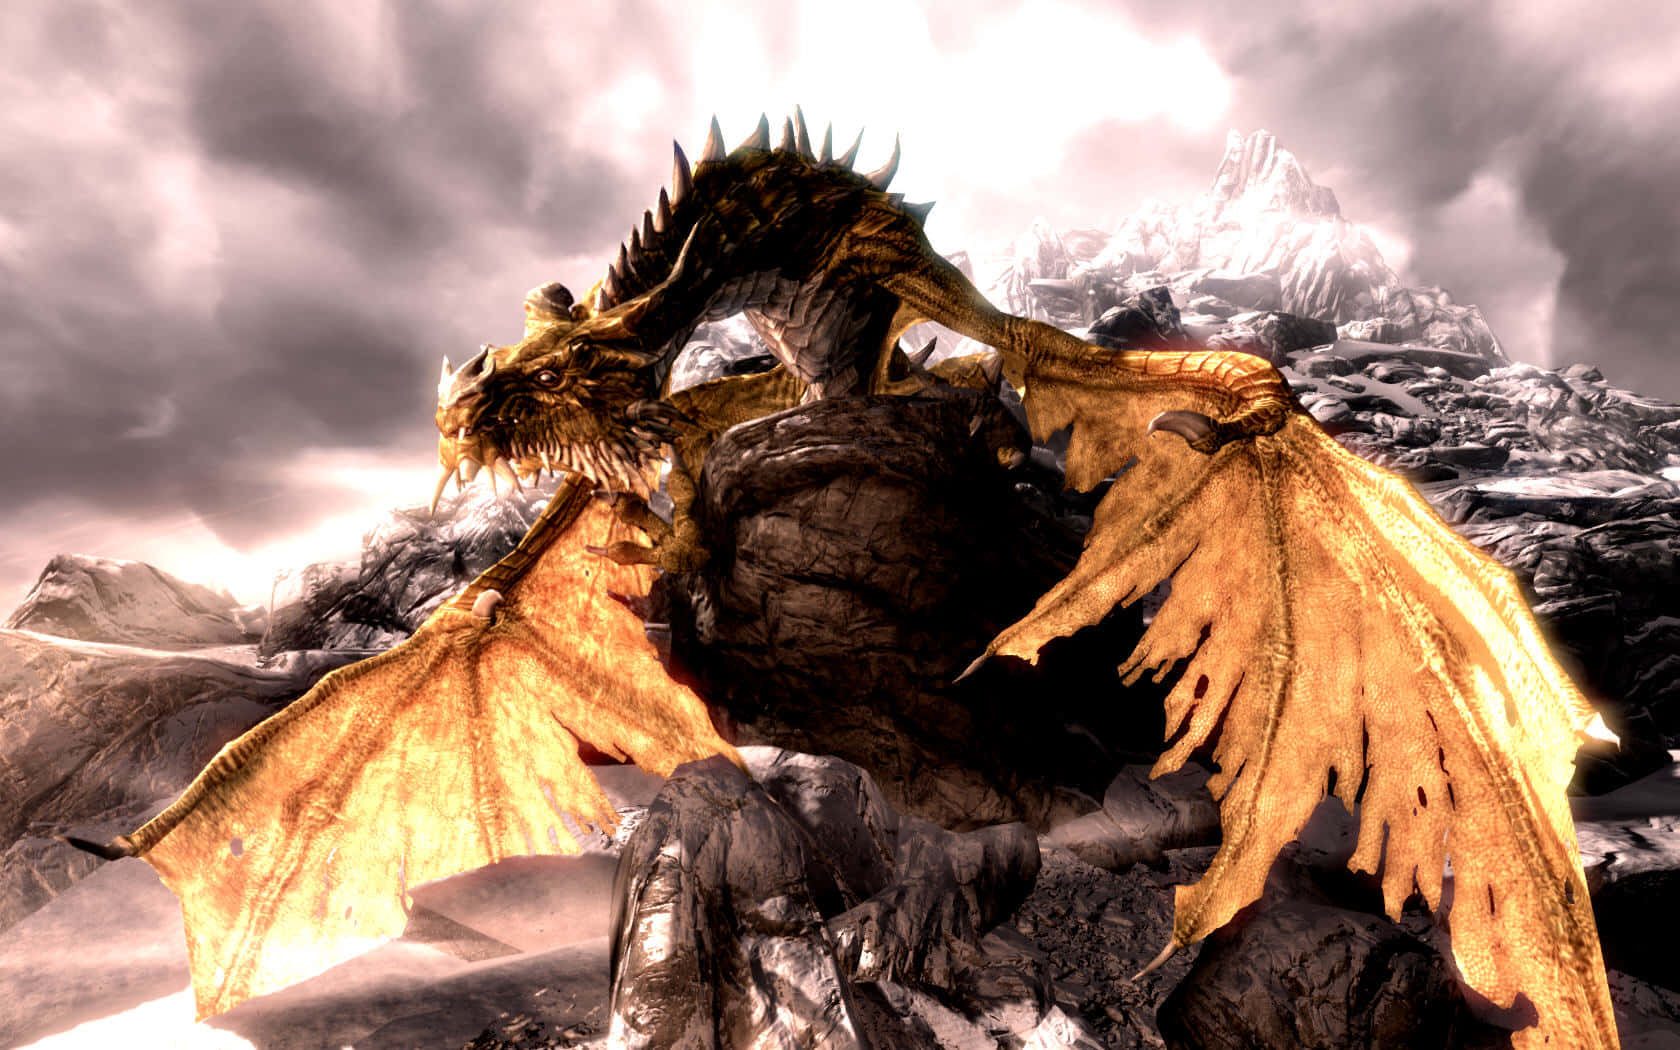 Paarthurnax, the iconic dragon from Skyrim, soaring high above the mountain peaks Wallpaper